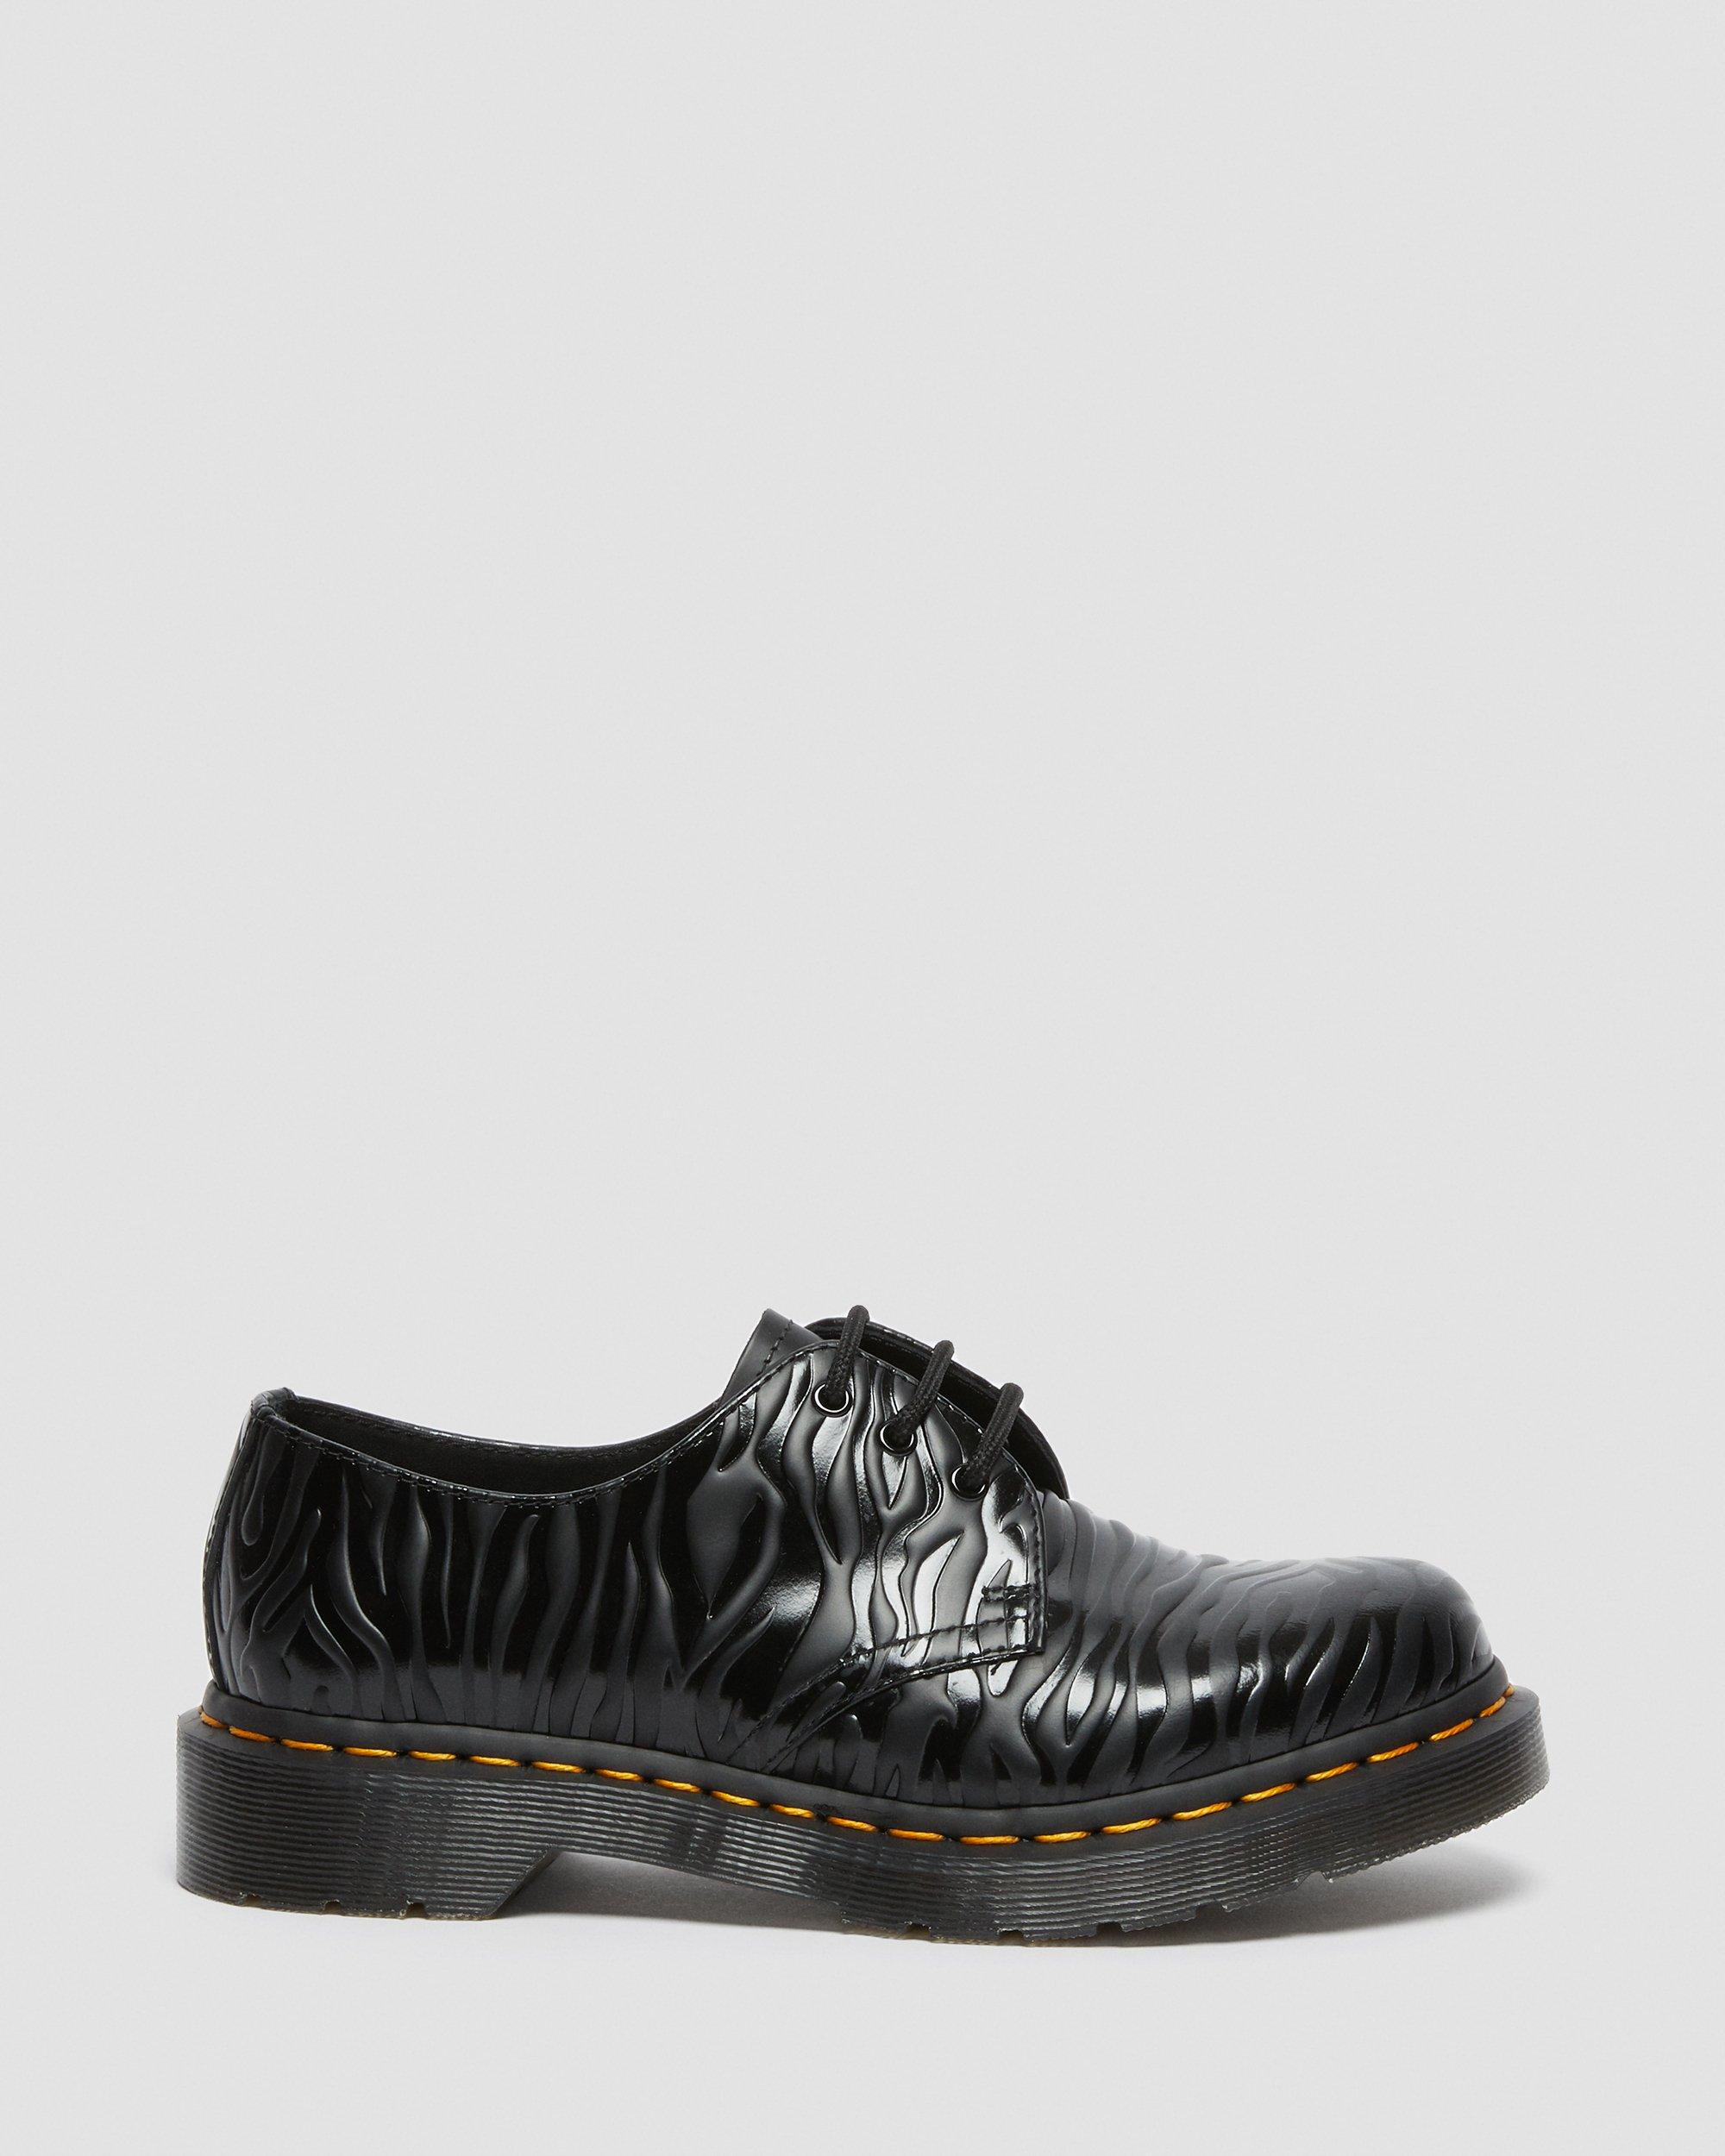 1461 Zebra Emboss Smooth Leather Shoes | Dr. Martens